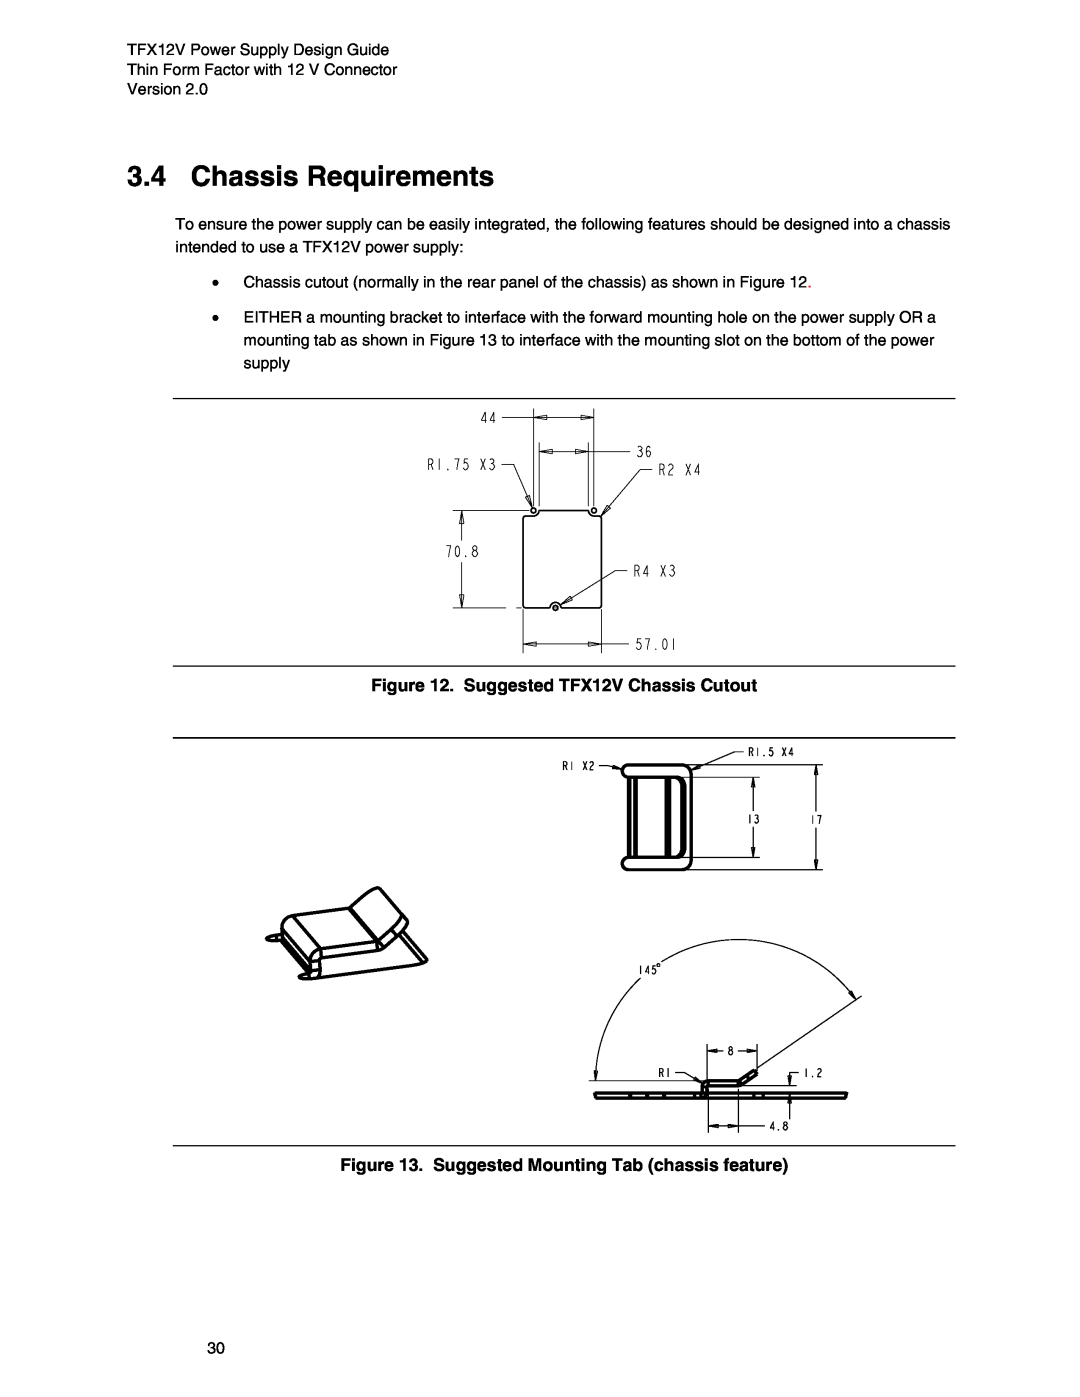 Intel manual Chassis Requirements, Suggested TFX12V Chassis Cutout, Suggested Mounting Tab chassis feature 